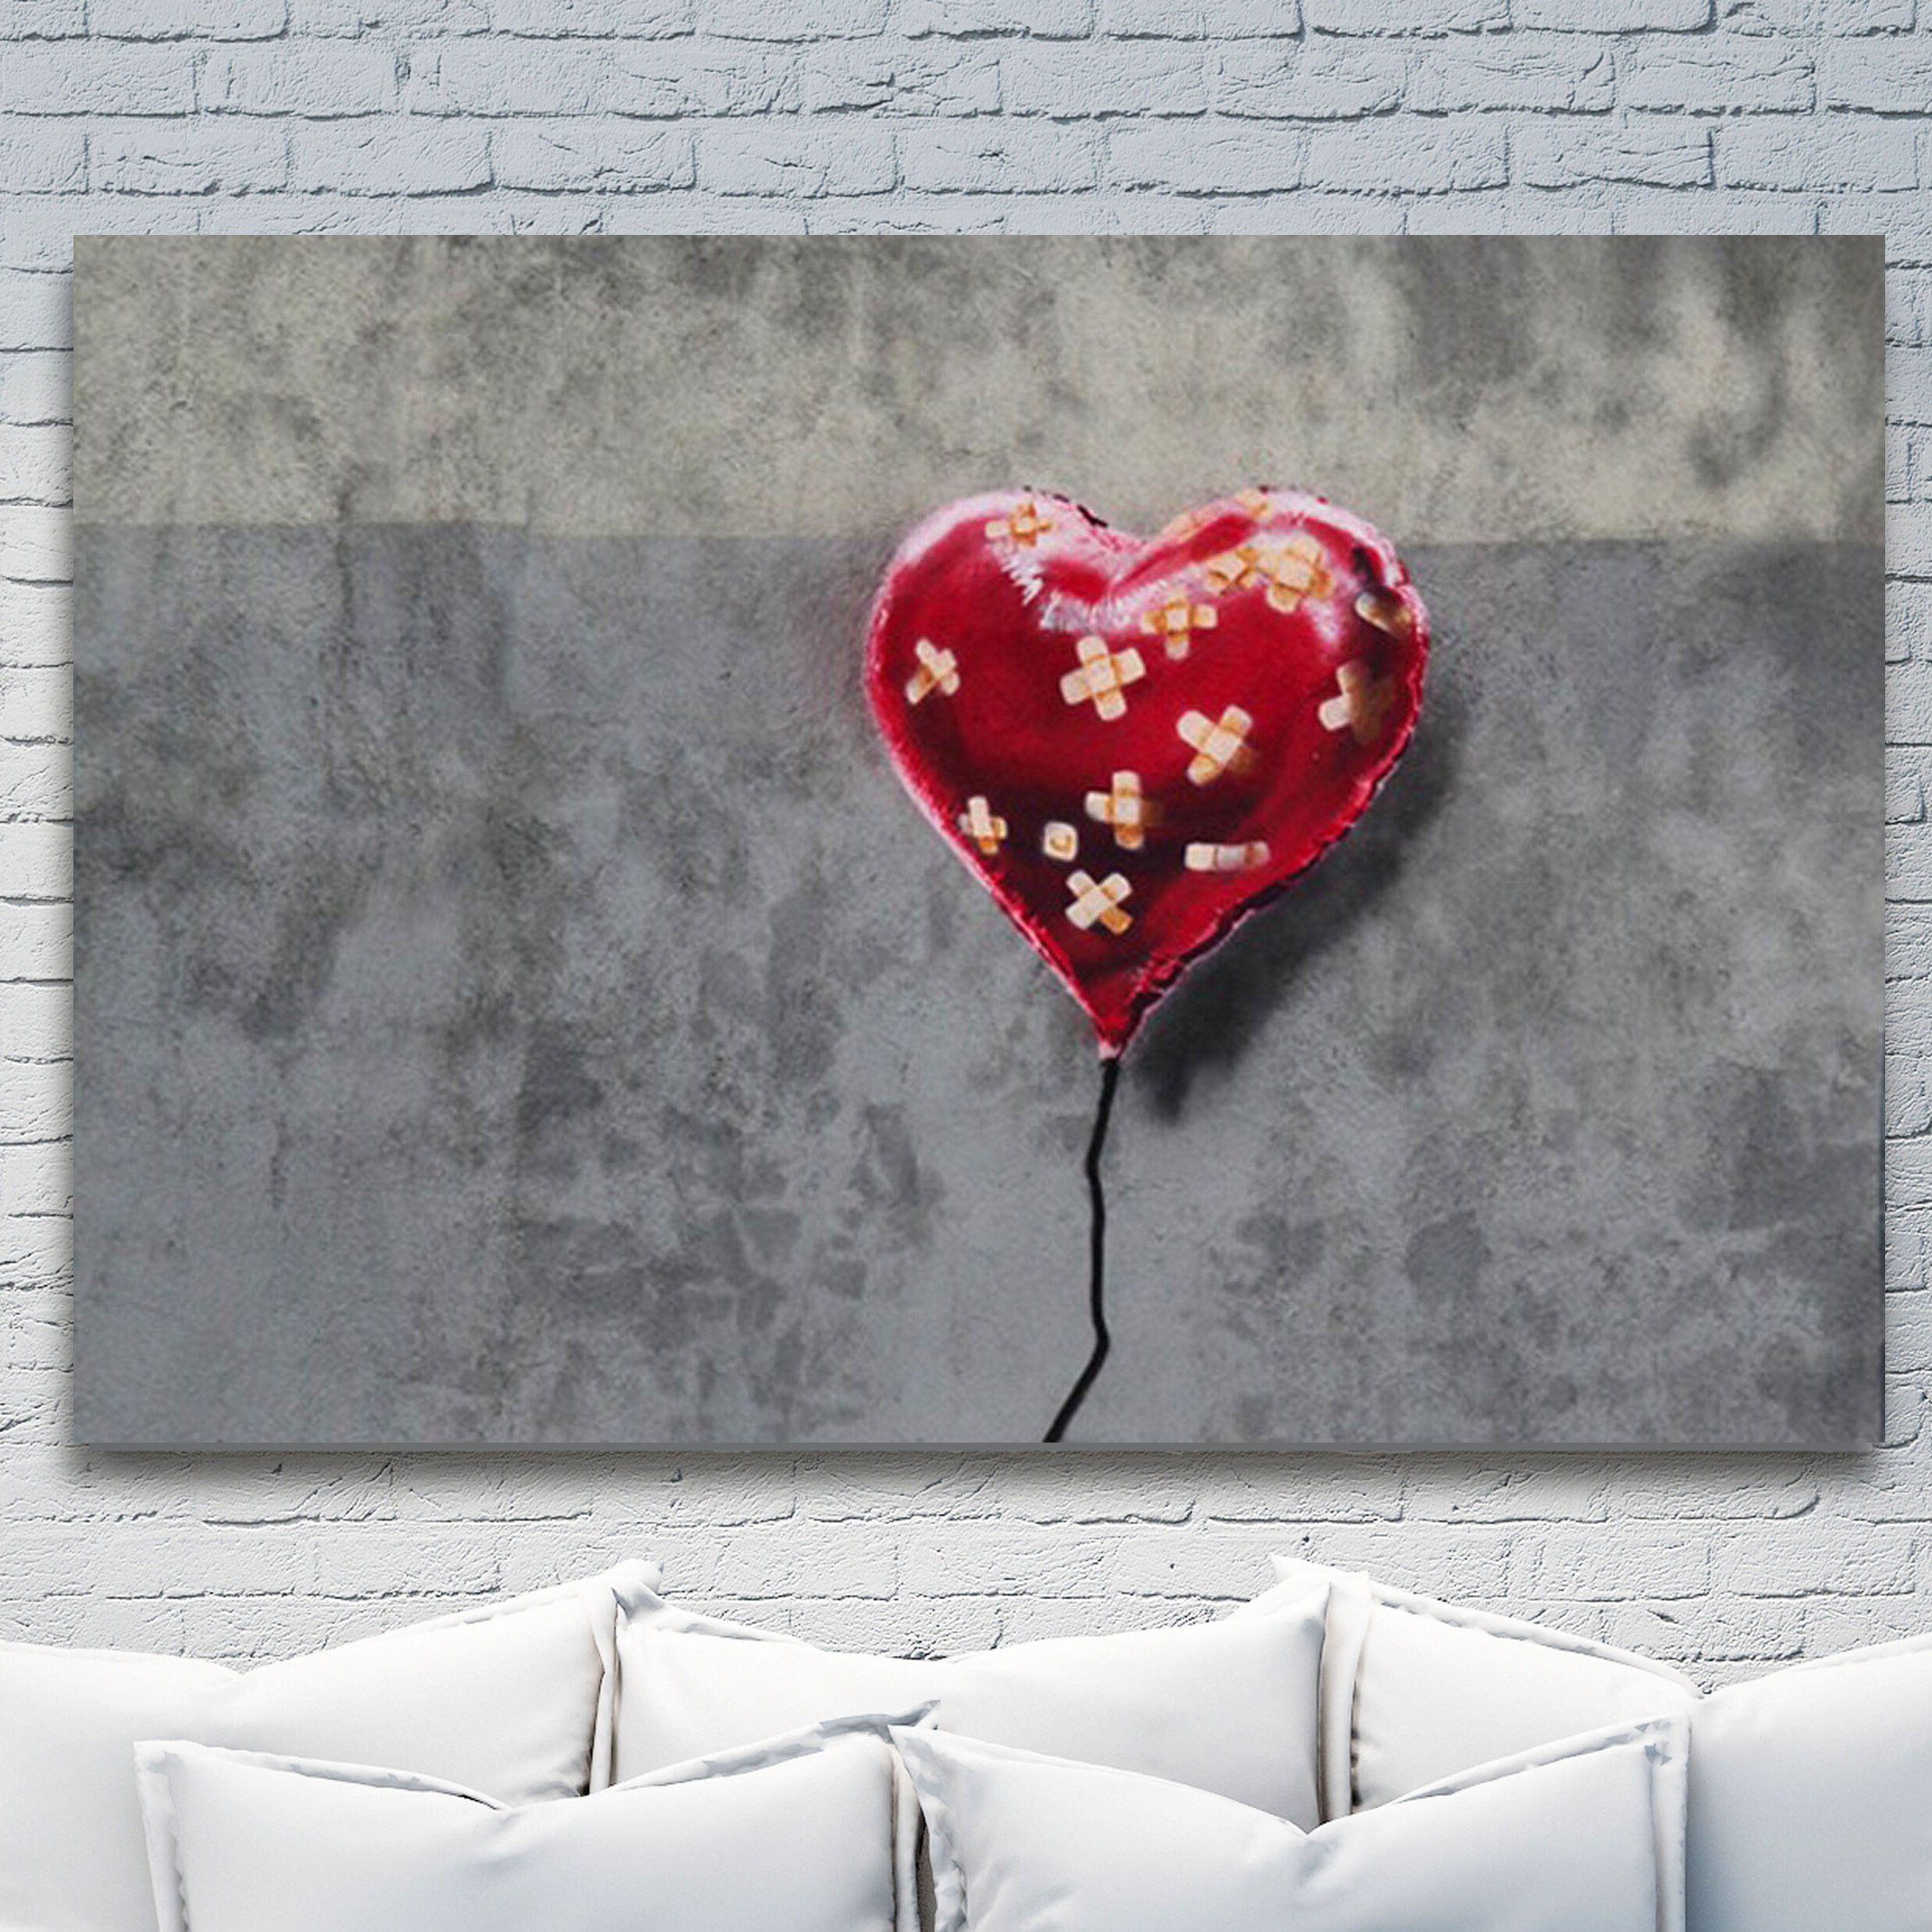 Ebern Designs Pieces Of My Heart On Canvas by Sydney Edmunds Painting &  Reviews